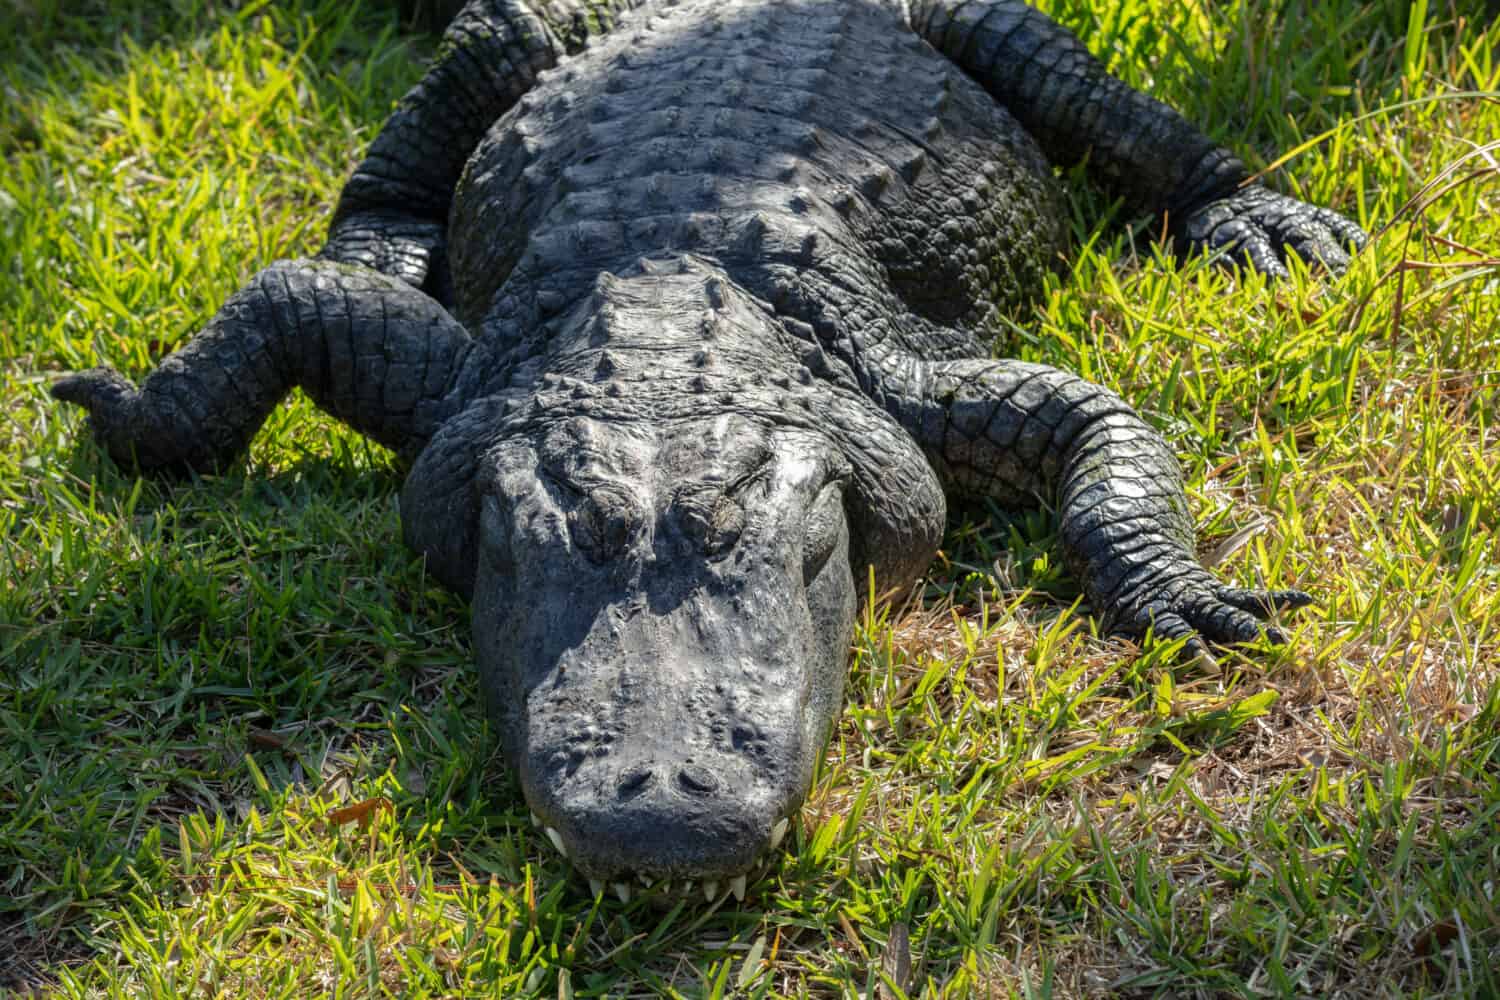 massive alligator napping with a toothy grin